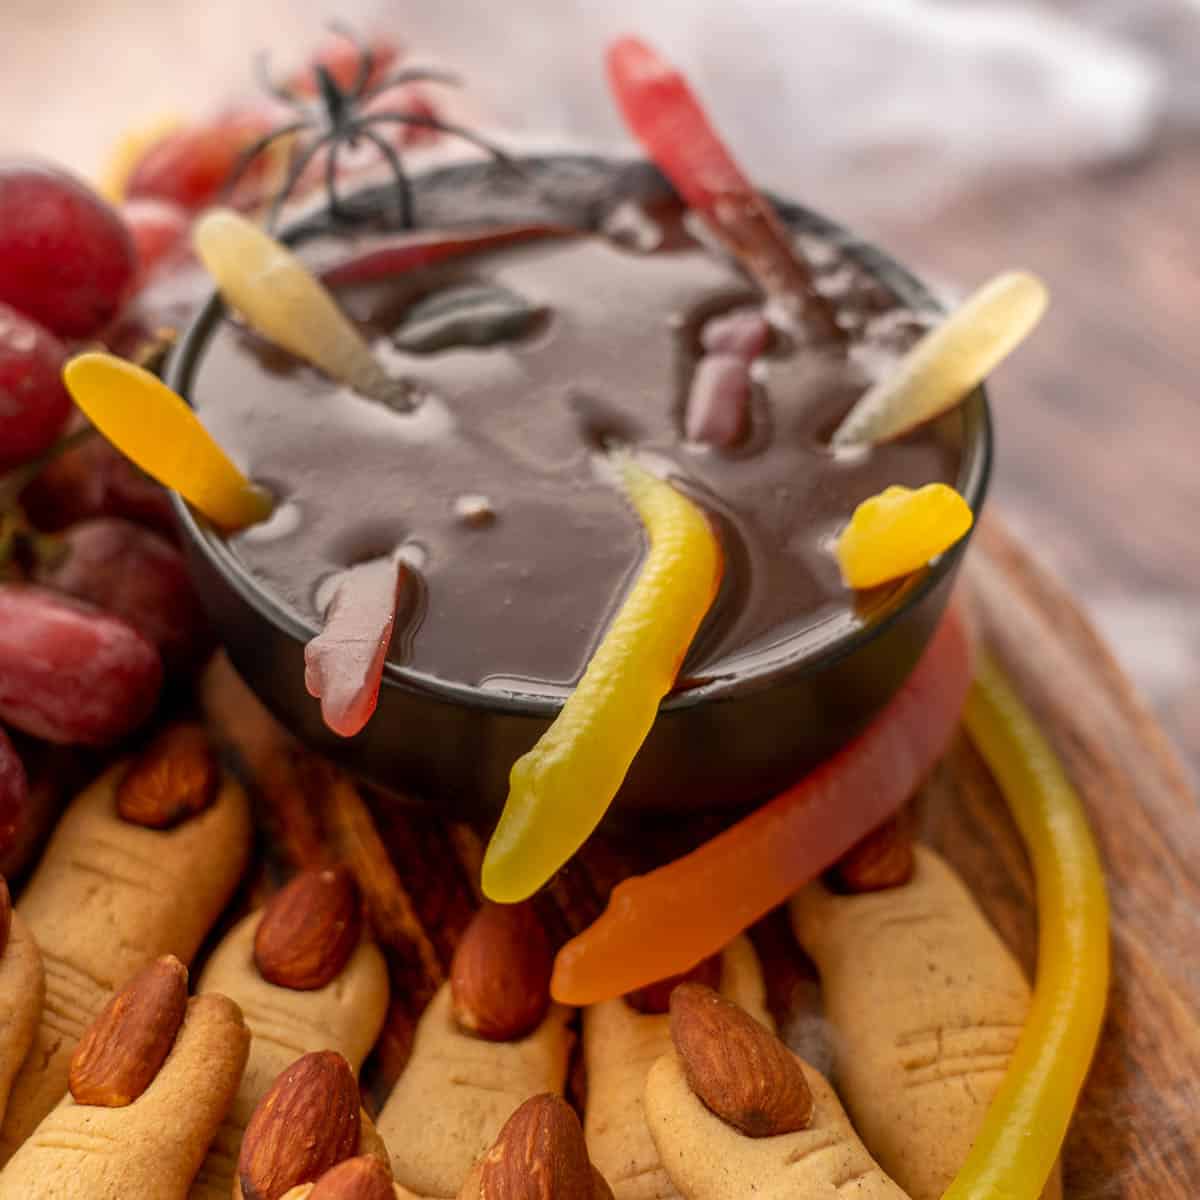 A bowl of chocolate ganache decorated with sweets including snackes to look like witches brew.